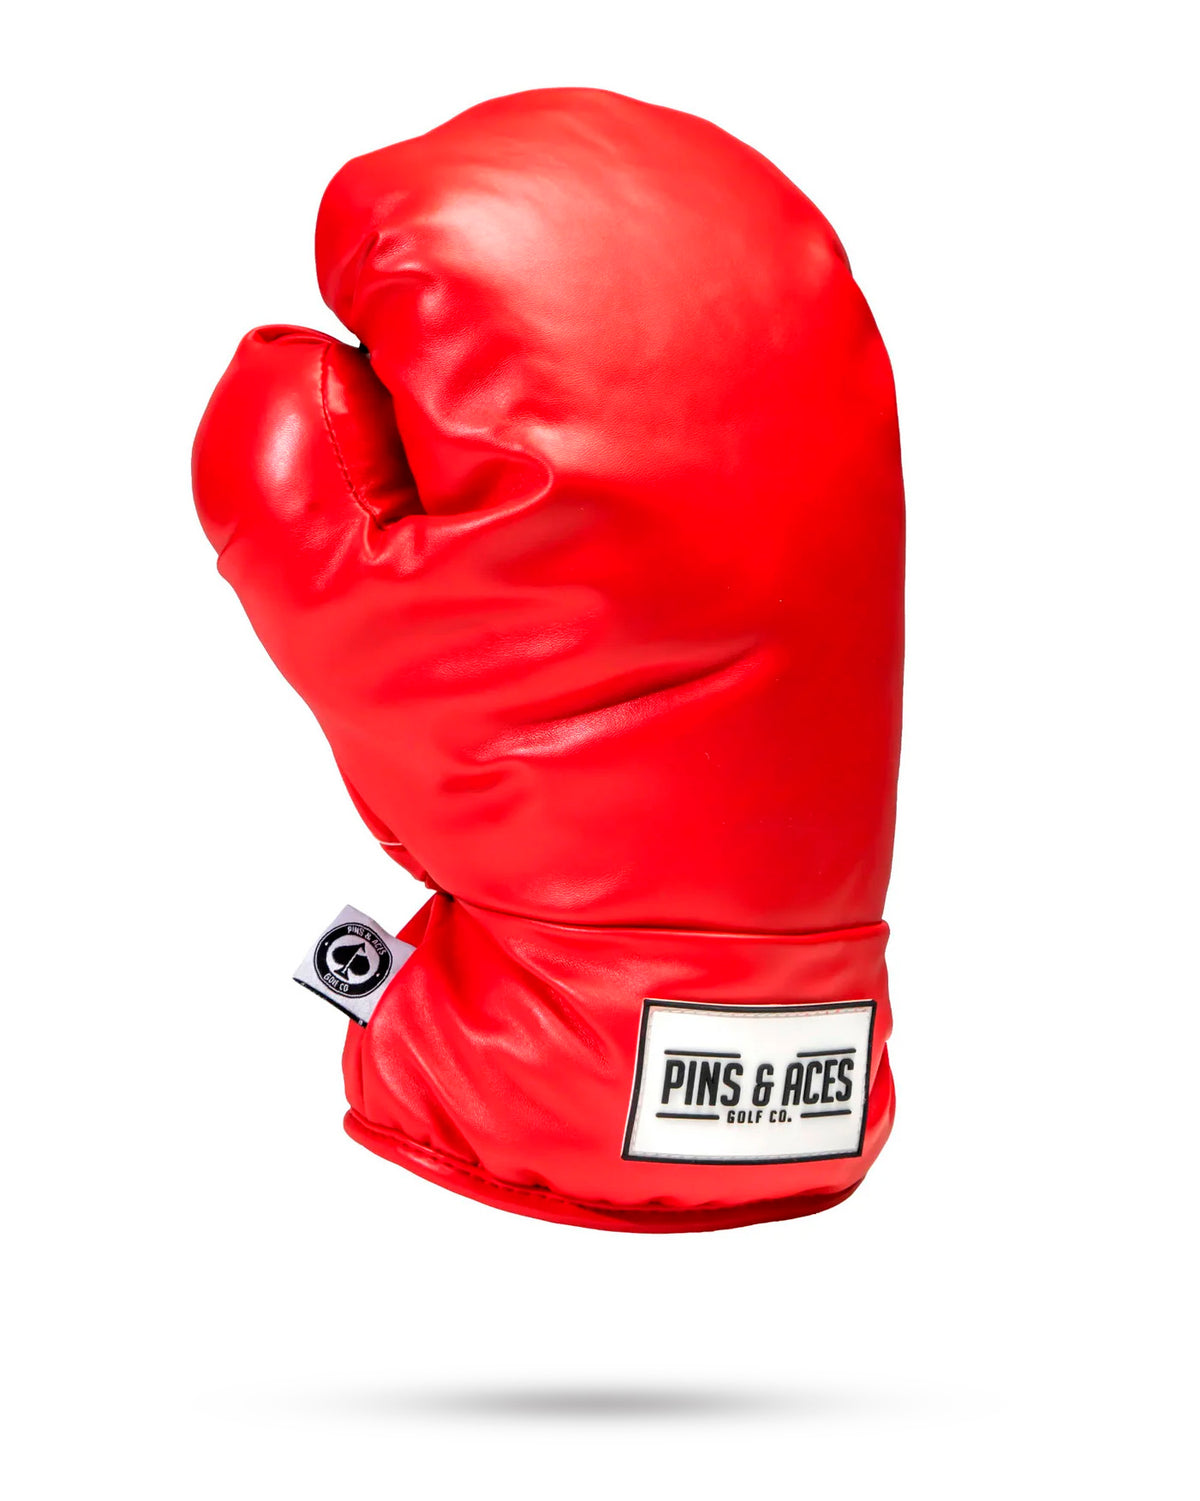 Boxing Glove - Driver Cover